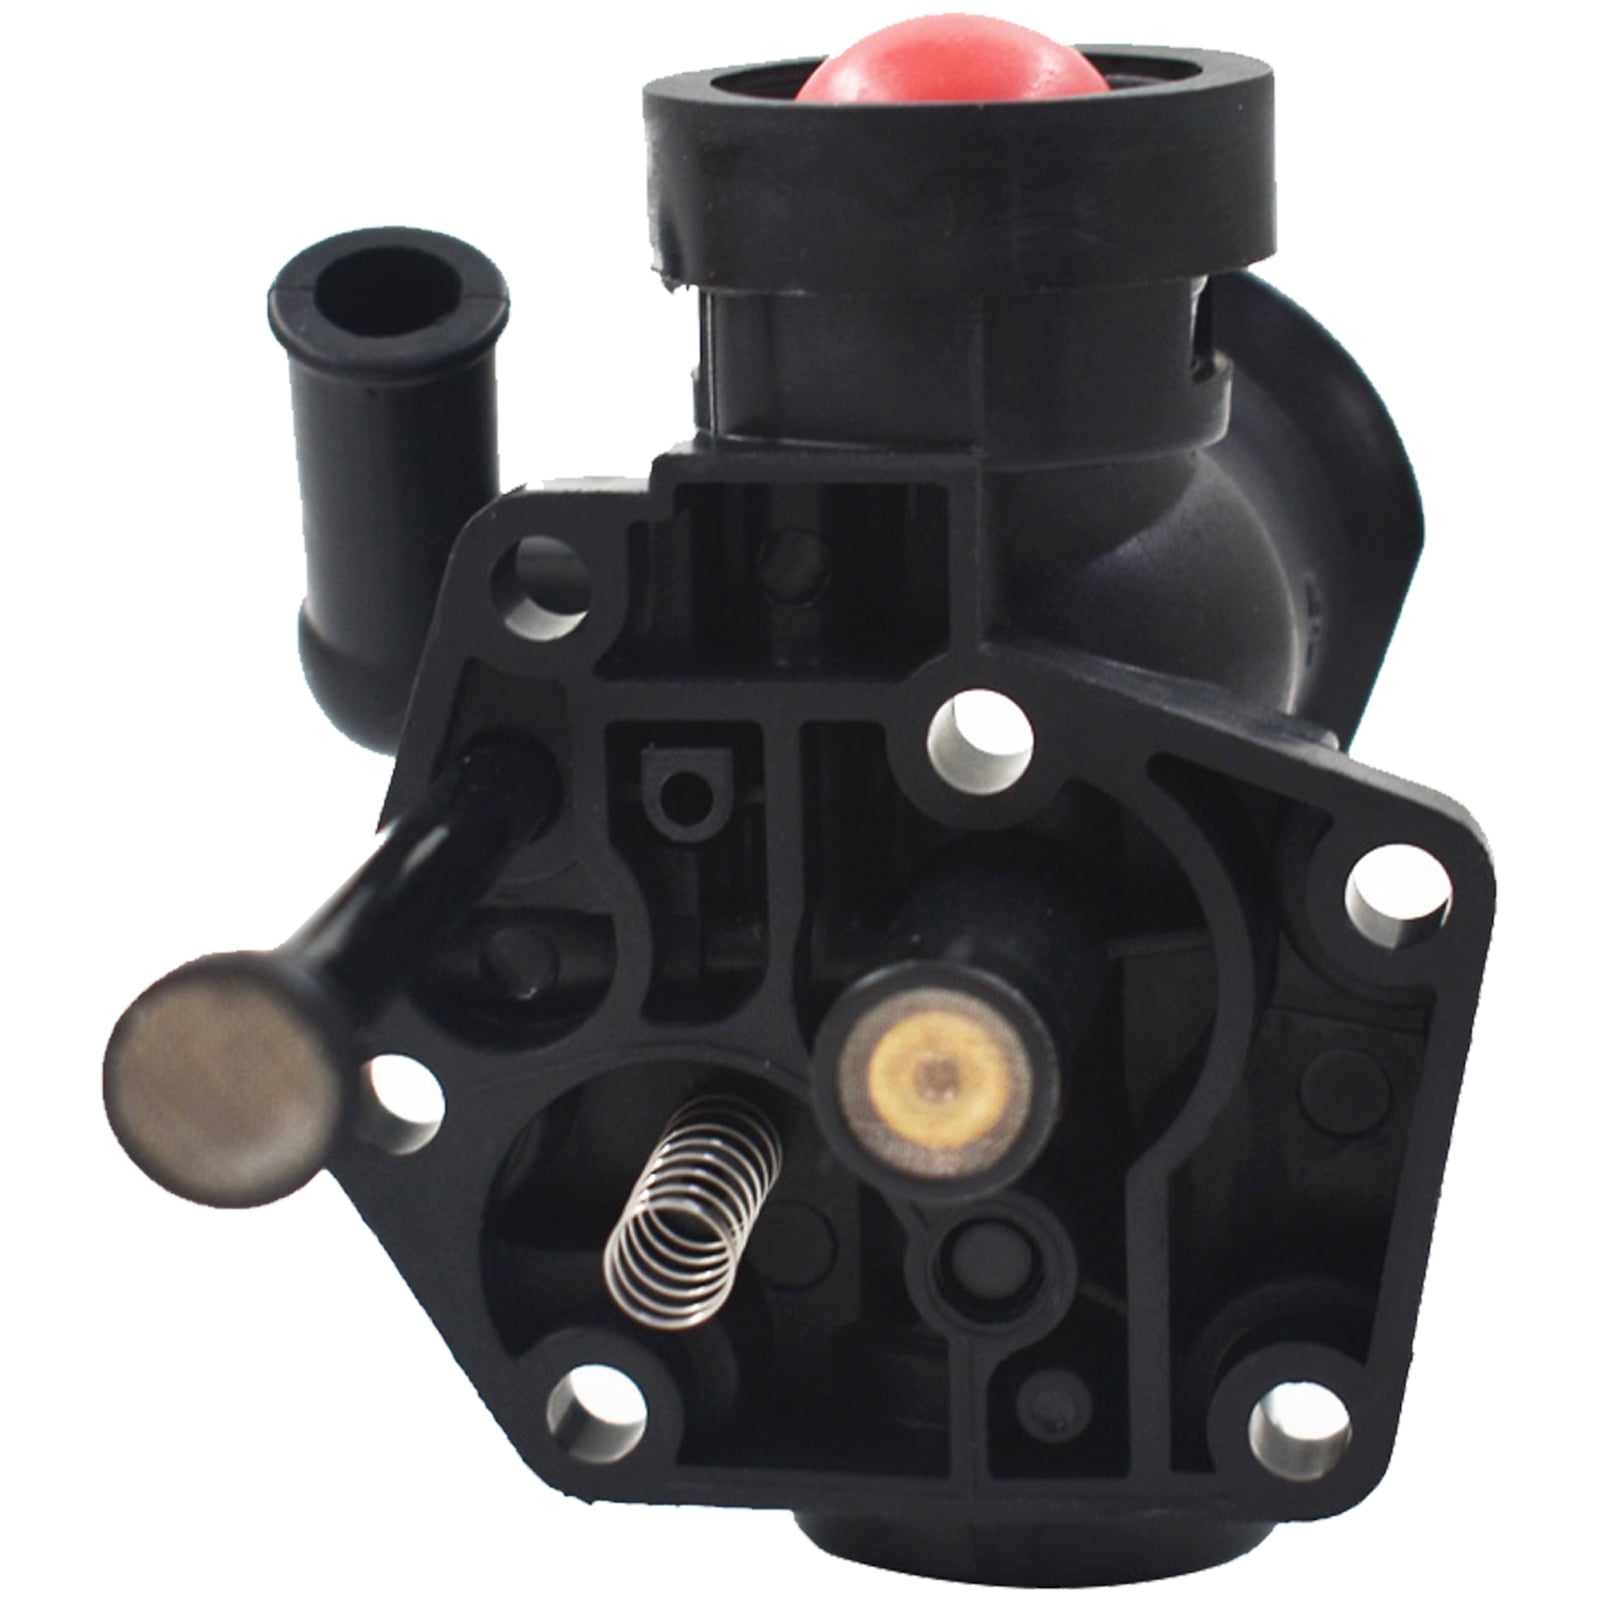 Details about   Carburetor Carb For Briggs and Stratton 795477 498809 497619 795469 Carburettor 